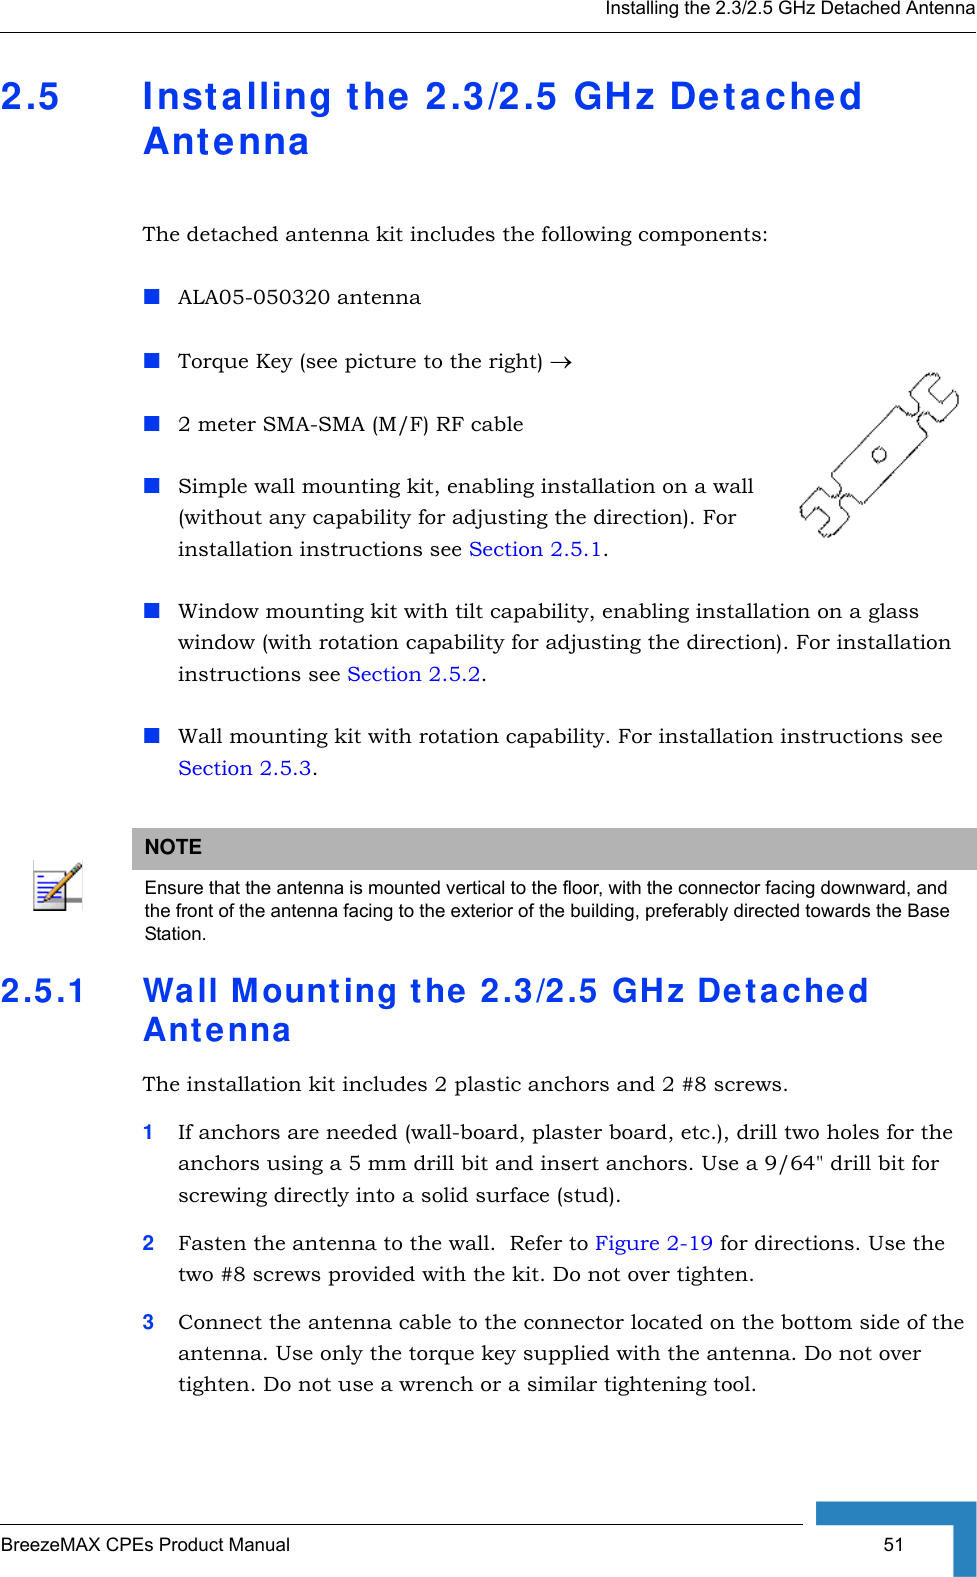 Installing the 2.3/2.5 GHz Detached AntennaBreezeMAX CPEs Product Manual  512.5 Installing the 2.3/2.5 GHz Detached AntennaThe detached antenna kit includes the following components:ALA05-050320 antennaTorque Key (see picture to the right) →2 meter SMA-SMA (M/F) RF cableSimple wall mounting kit, enabling installation on a wall (without any capability for adjusting the direction). For installation instructions see Section 2.5.1.Window mounting kit with tilt capability, enabling installation on a glass window (with rotation capability for adjusting the direction). For installation instructions see Section 2.5.2.Wall mounting kit with rotation capability. For installation instructions see Section 2.5.3.2.5.1 Wall Mounting the 2.3/2.5 GHz Detached AntennaThe installation kit includes 2 plastic anchors and 2 #8 screws.1If anchors are needed (wall-board, plaster board, etc.), drill two holes for the anchors using a 5 mm drill bit and insert anchors. Use a 9/64&quot; drill bit for screwing directly into a solid surface (stud).2Fasten the antenna to the wall.  Refer to Figure 2-19 for directions. Use the two #8 screws provided with the kit. Do not over tighten. 3Connect the antenna cable to the connector located on the bottom side of the antenna. Use only the torque key supplied with the antenna. Do not over tighten. Do not use a wrench or a similar tightening tool.NOTEEnsure that the antenna is mounted vertical to the floor, with the connector facing downward, and the front of the antenna facing to the exterior of the building, preferably directed towards the Base Station.